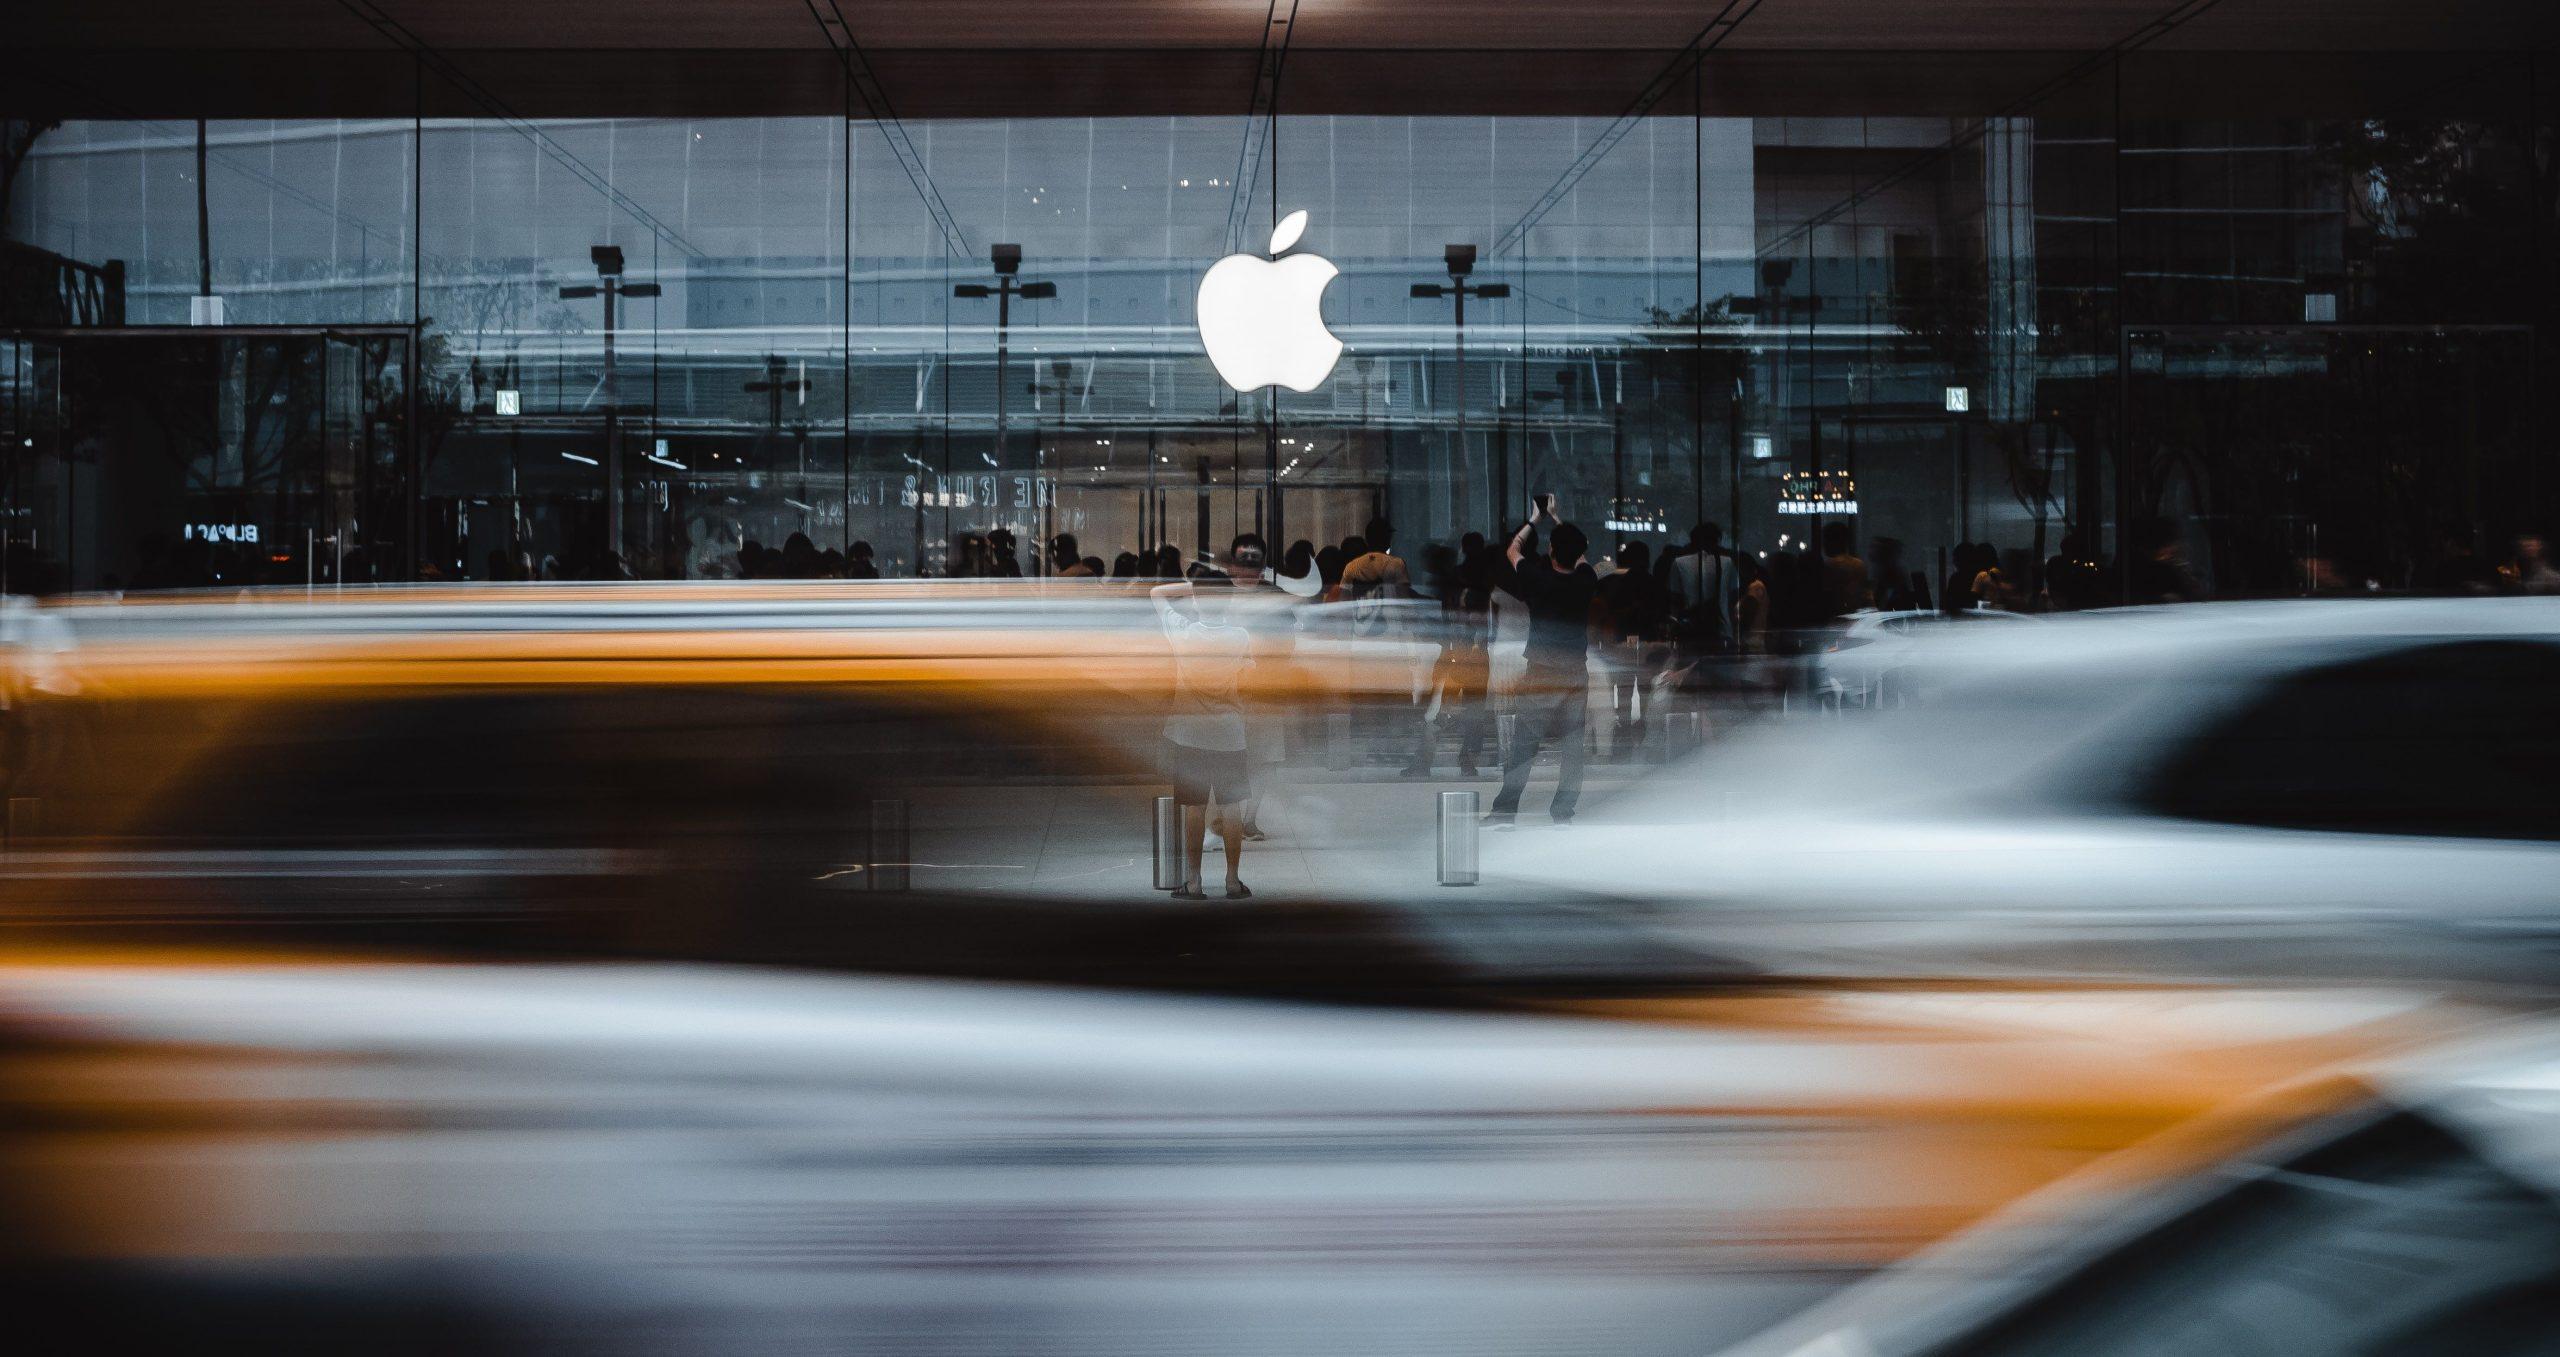 Apple logo on building facade in front of blurred traffic.